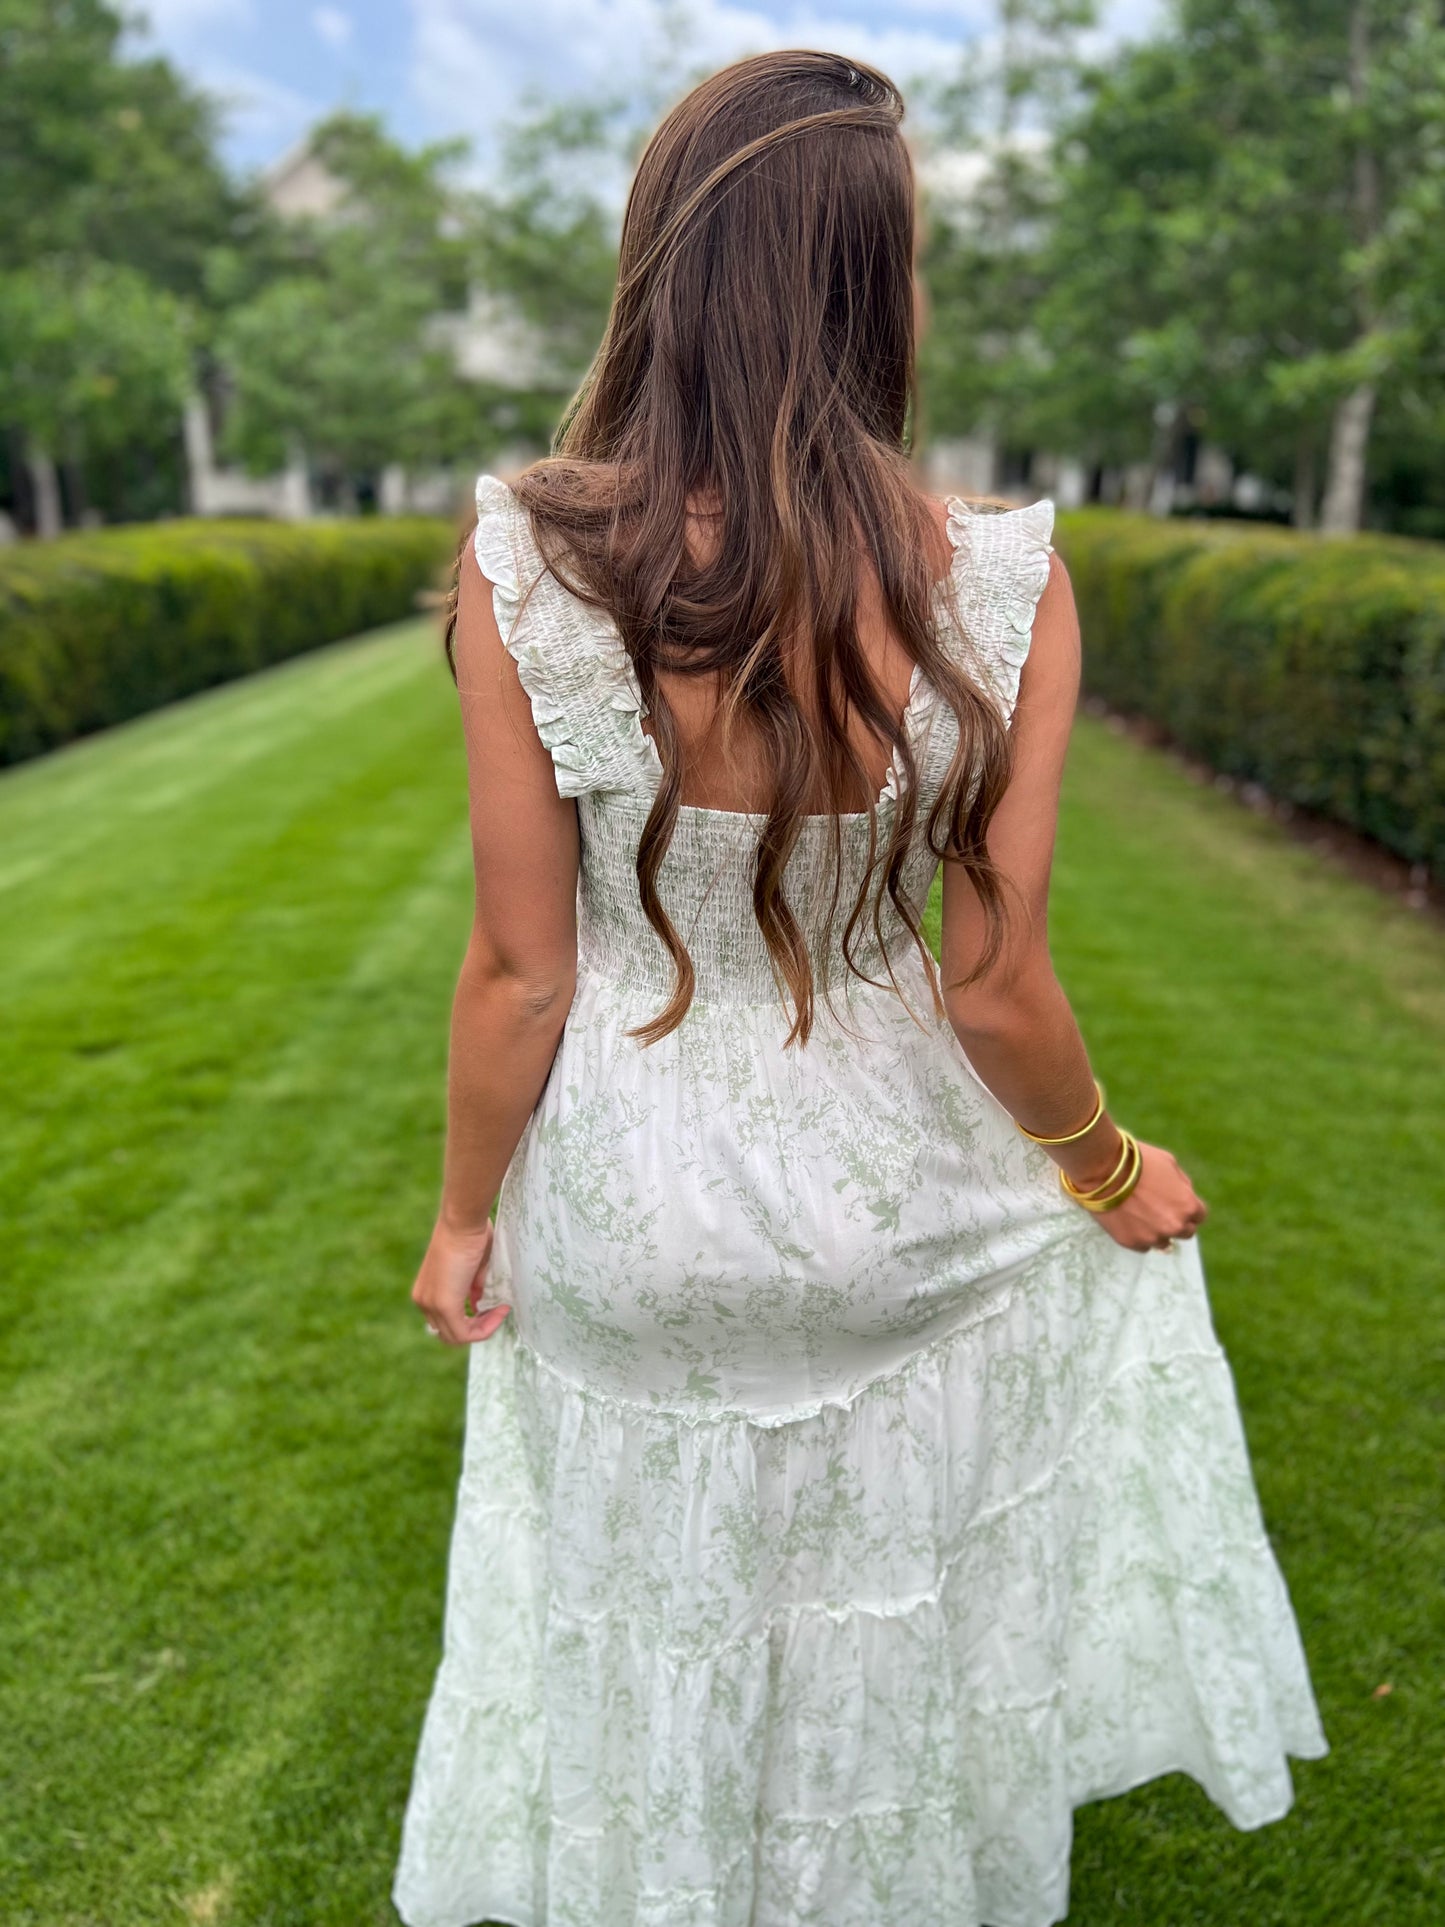 The Green Gables Dress by Lucy Paris